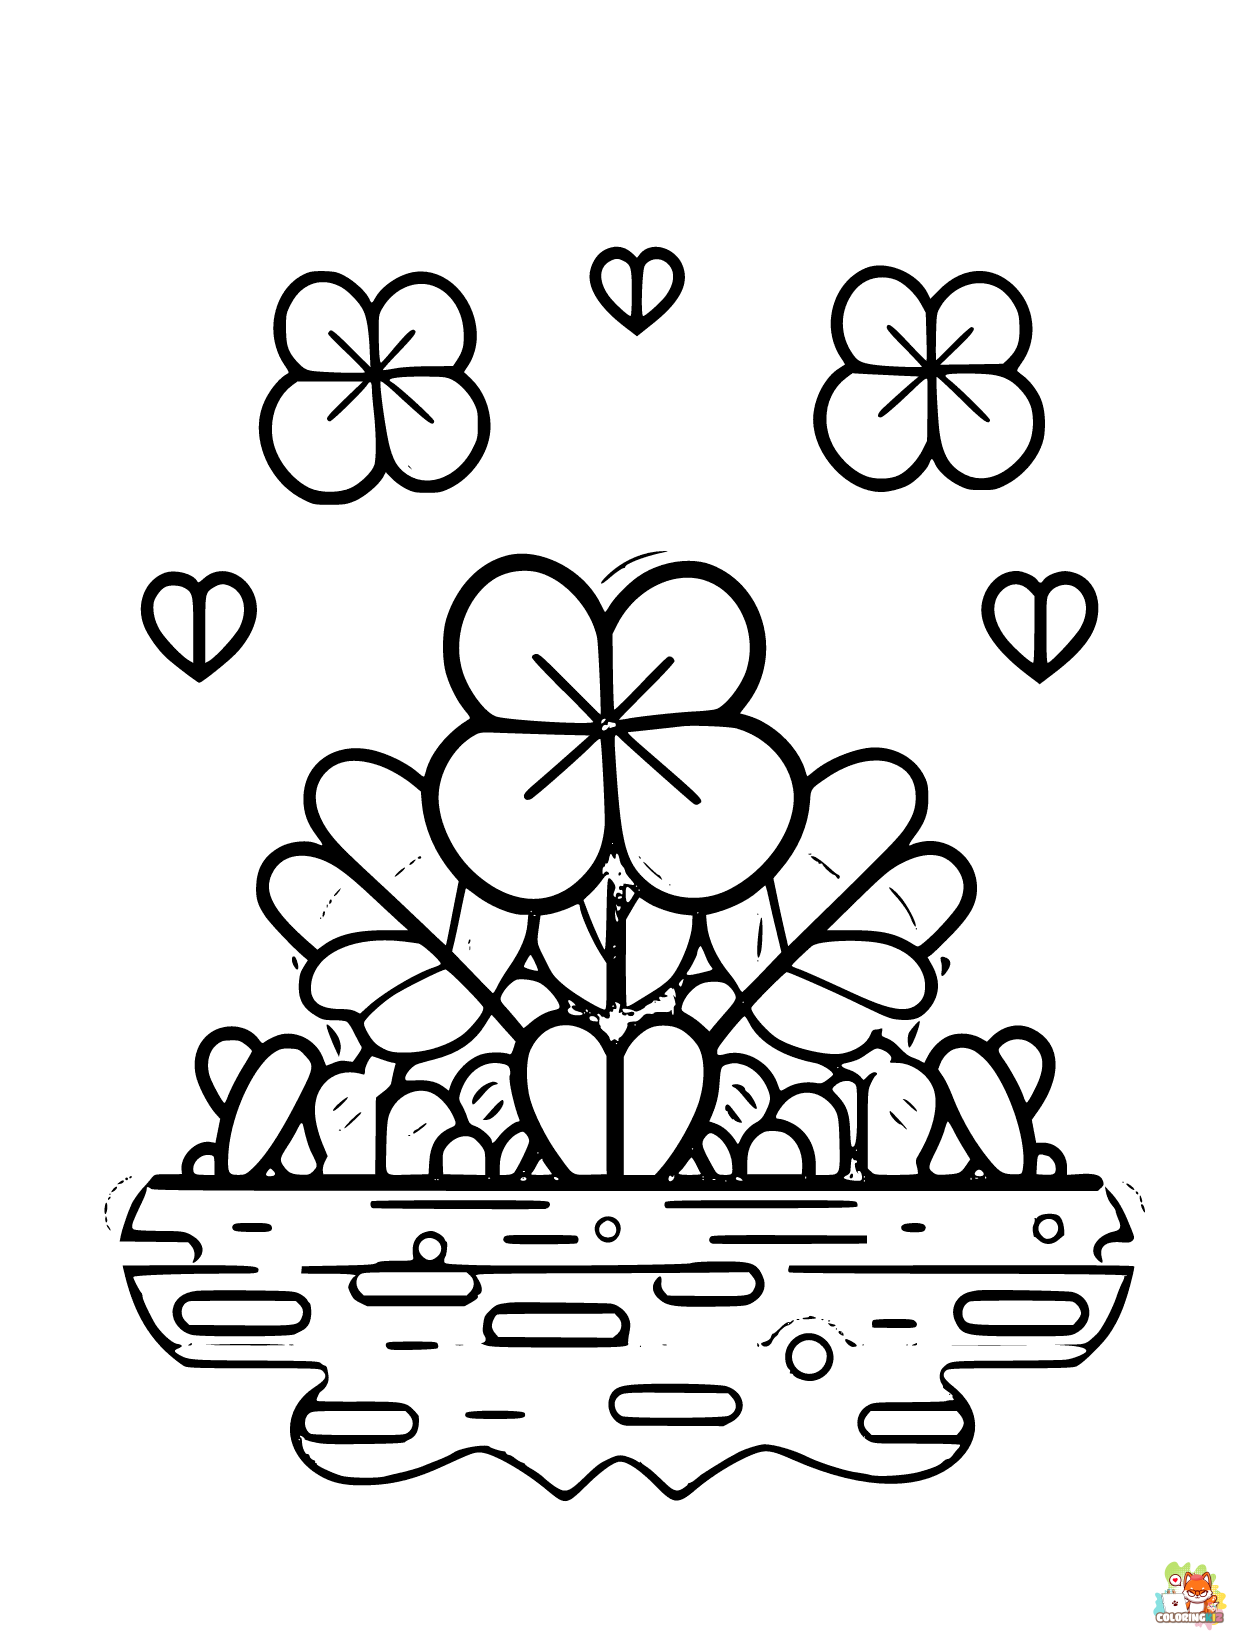 Printable clover coloring sheets